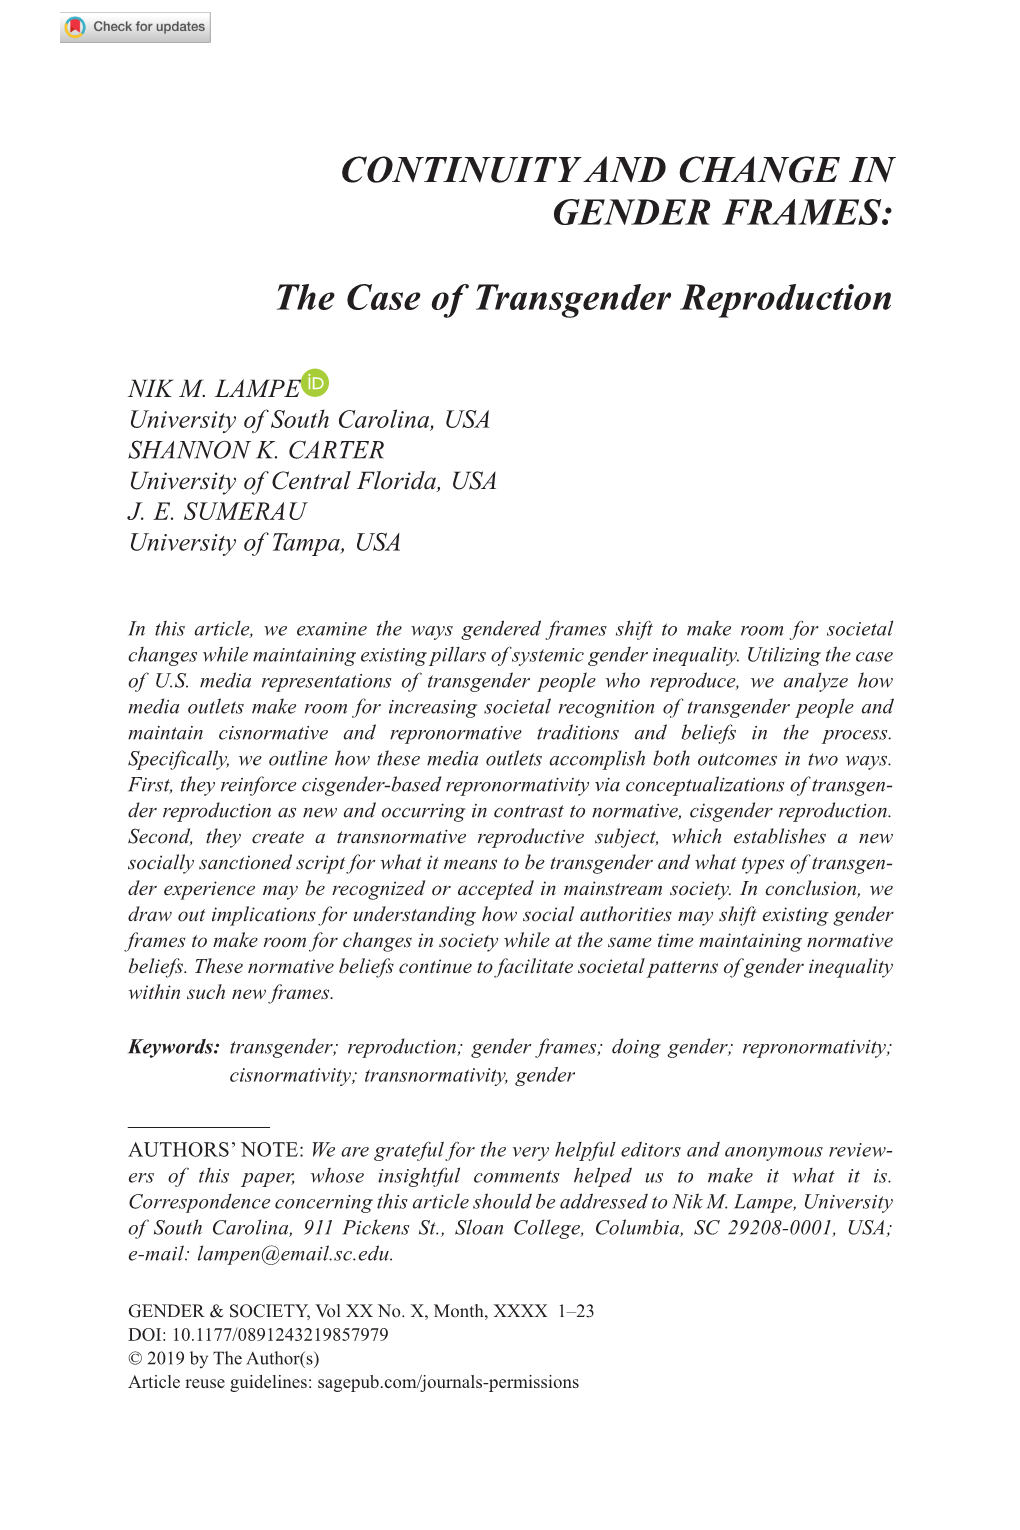 The Case of Transgender Reproduction